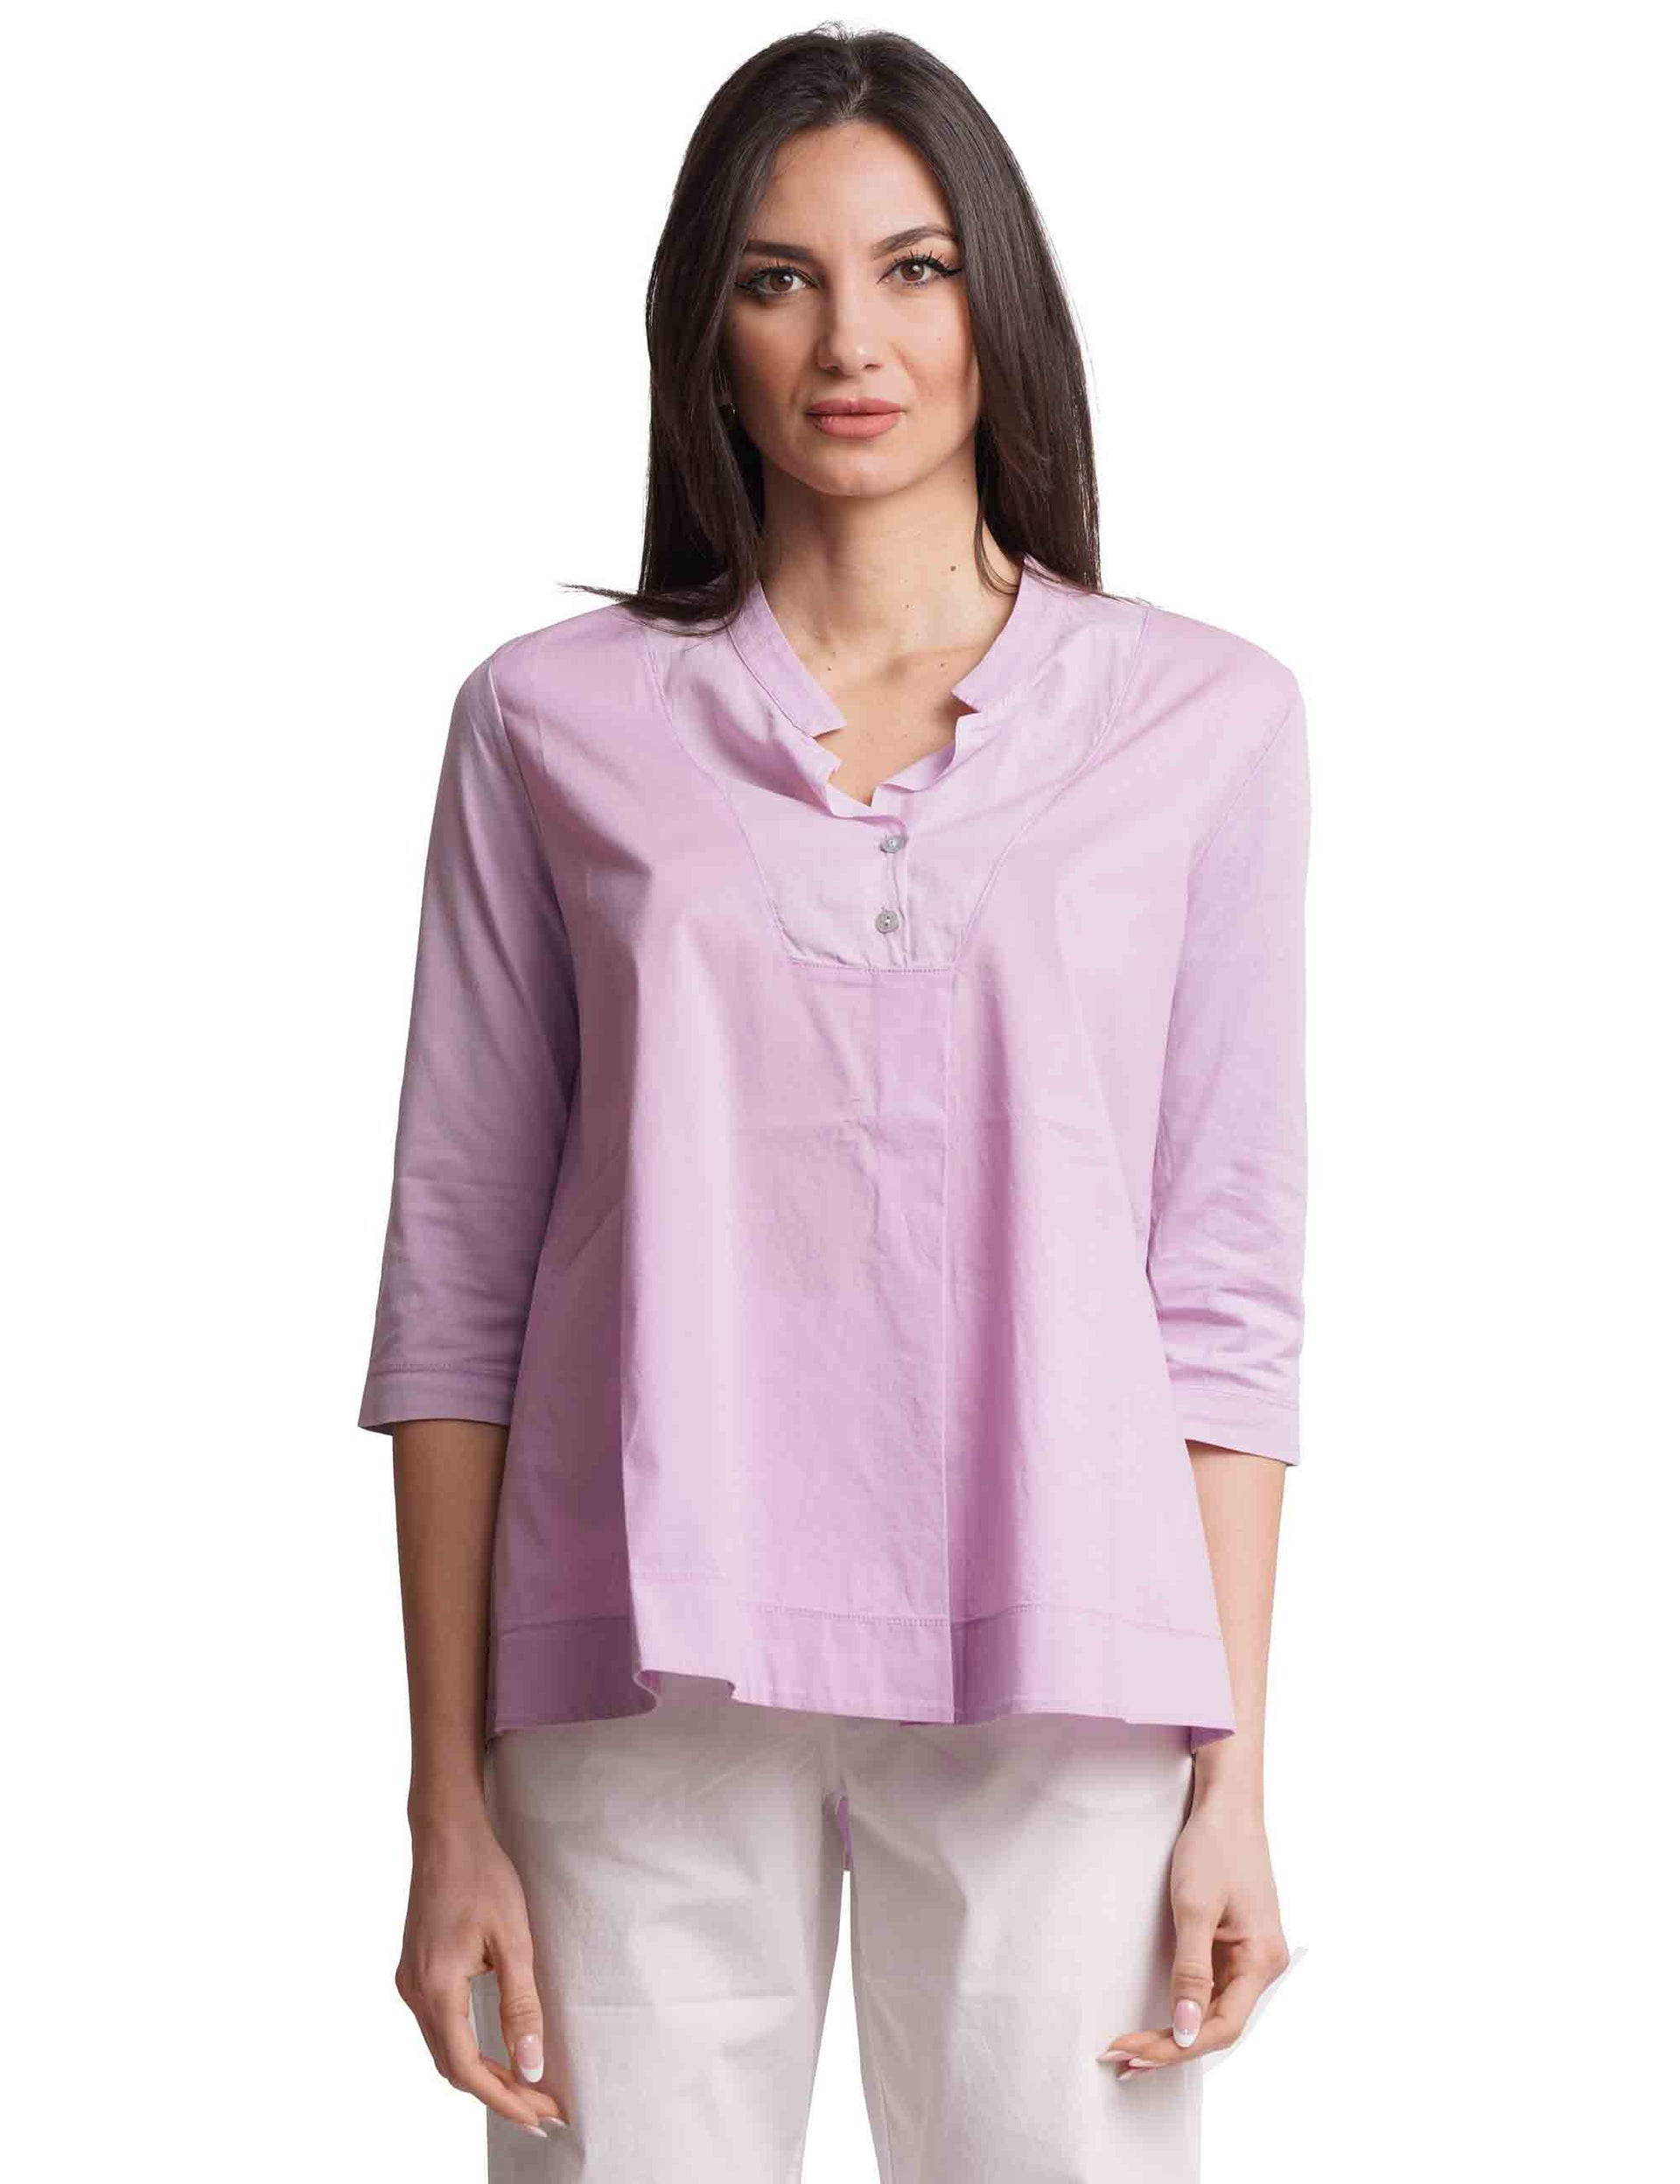 Women's lilac cotton shirts with 3/4 sleeves